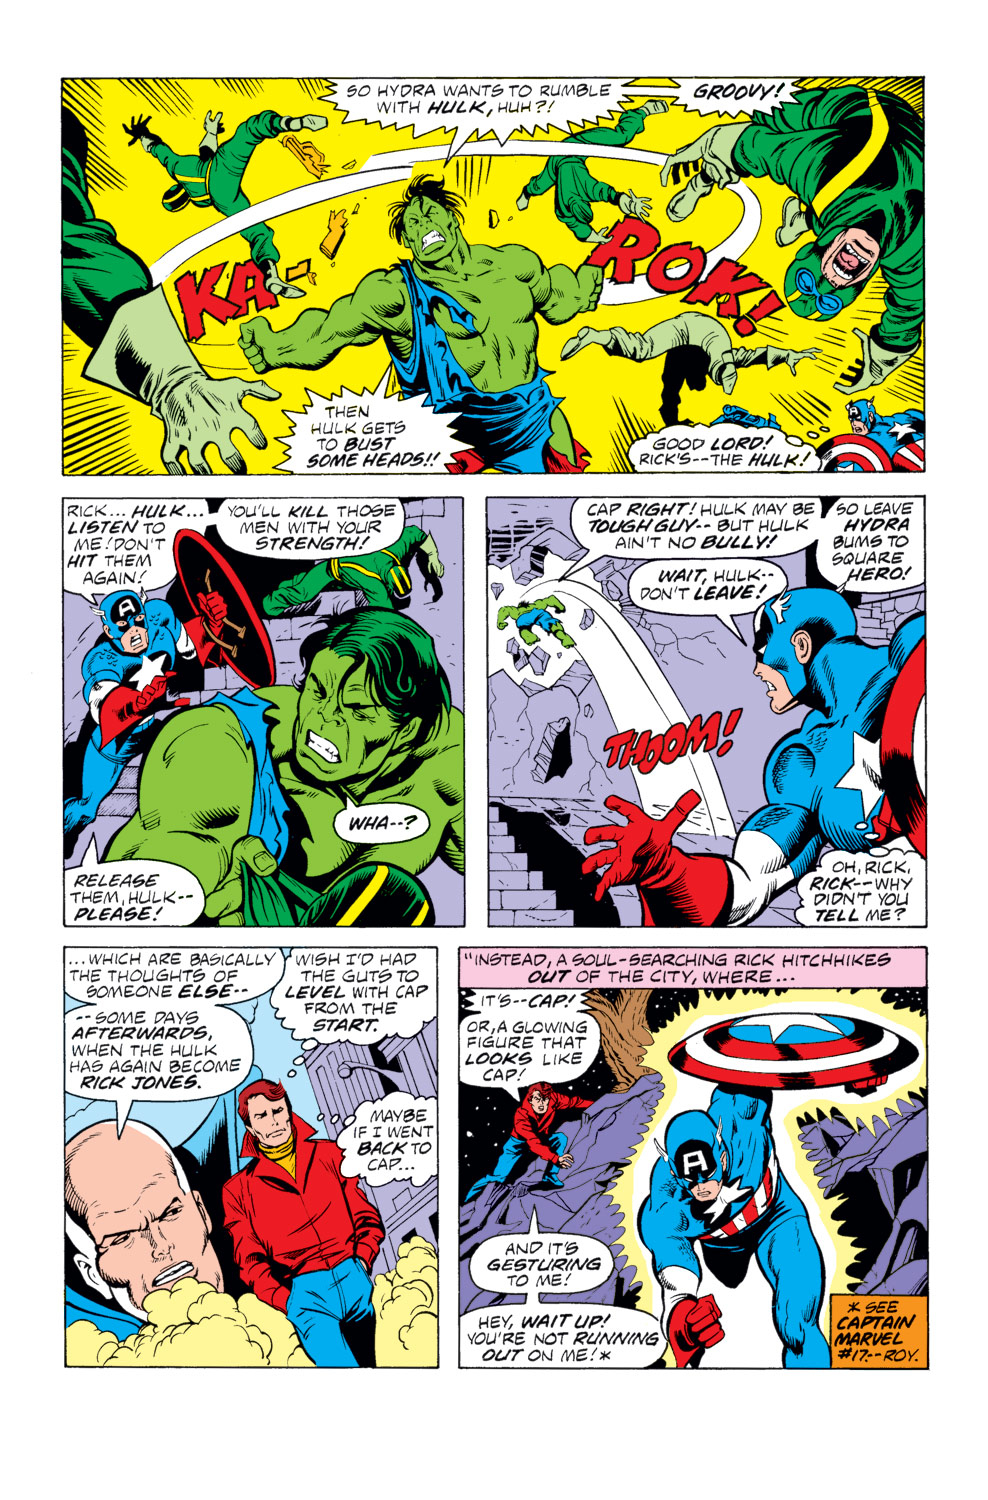 What If? (1977) issue 12 - Rick Jones had become the Hulk - Page 16